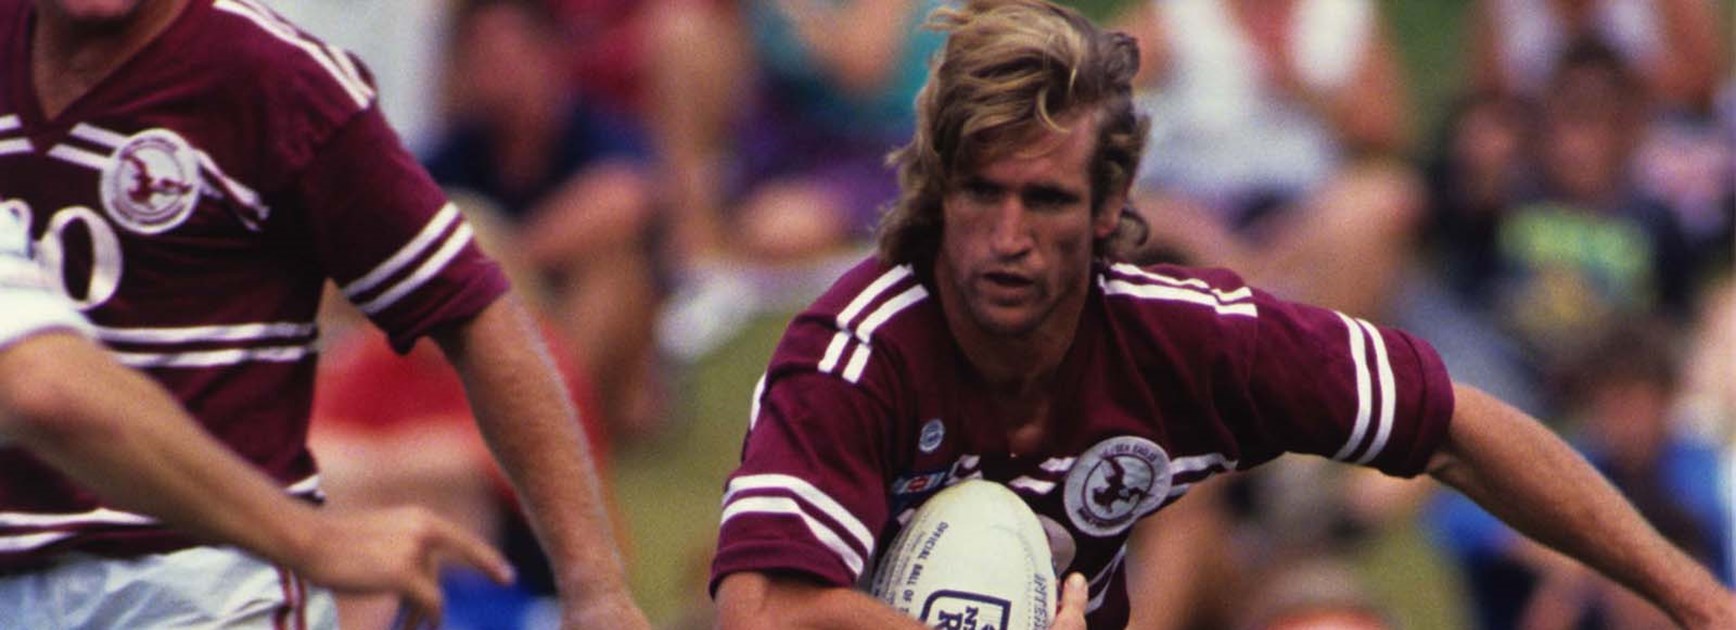 Des Hasler in his playing days for Manly.